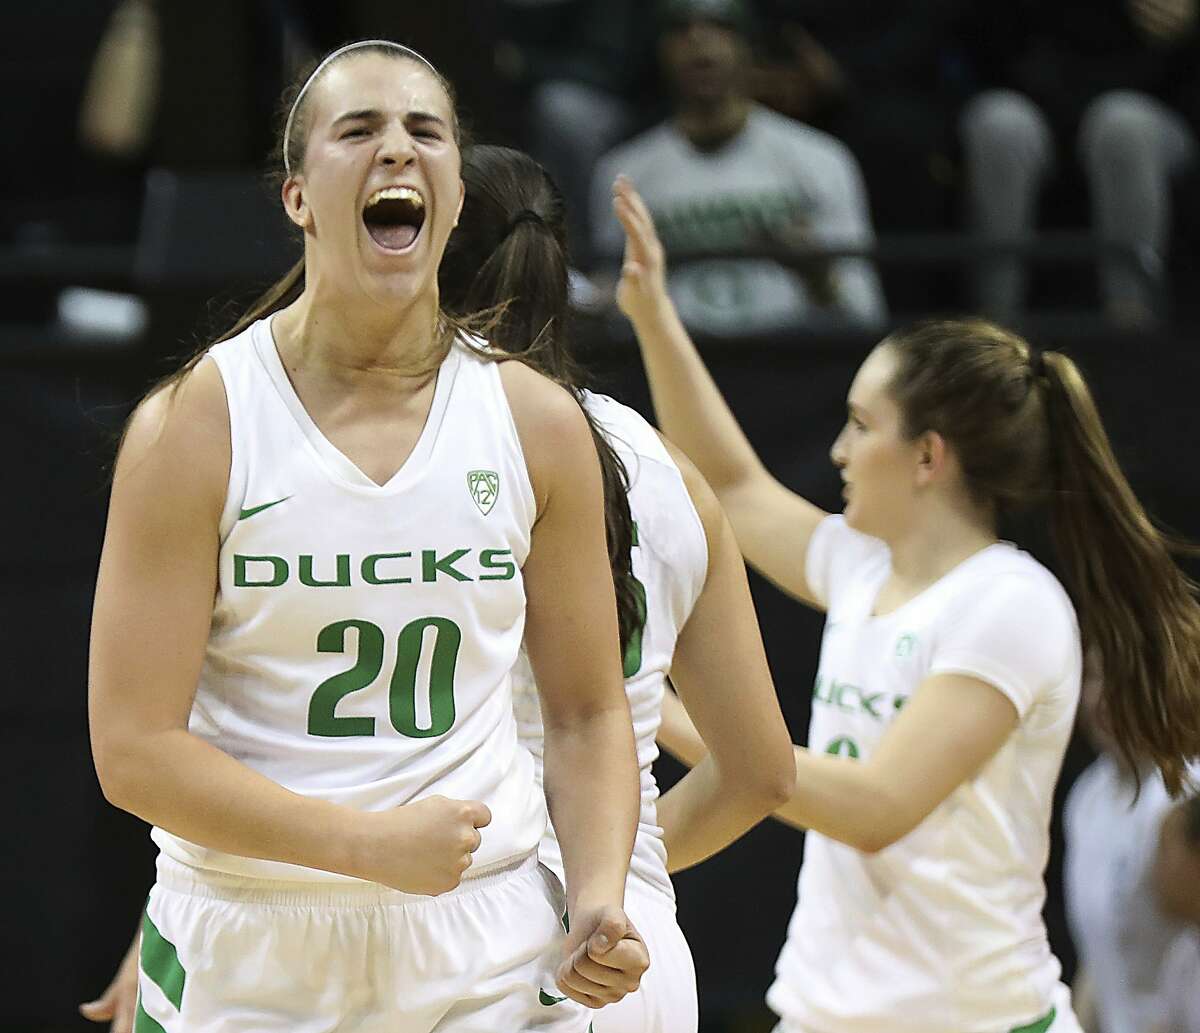 FILE - In this Tuesday, Dec. 18, 2018, file photo, Oregon guard Sabrina Ionescu (20) reacts during an NCAA college basketball game against Mississippi State in Eugene, Ore. Ionescu was named the John R. Wooden Women's Player of the year at the College Basketball Awards ceremony in Los Angeles Friday, April 12, 2019. (AP Photo/Charlie Litchfield, File)